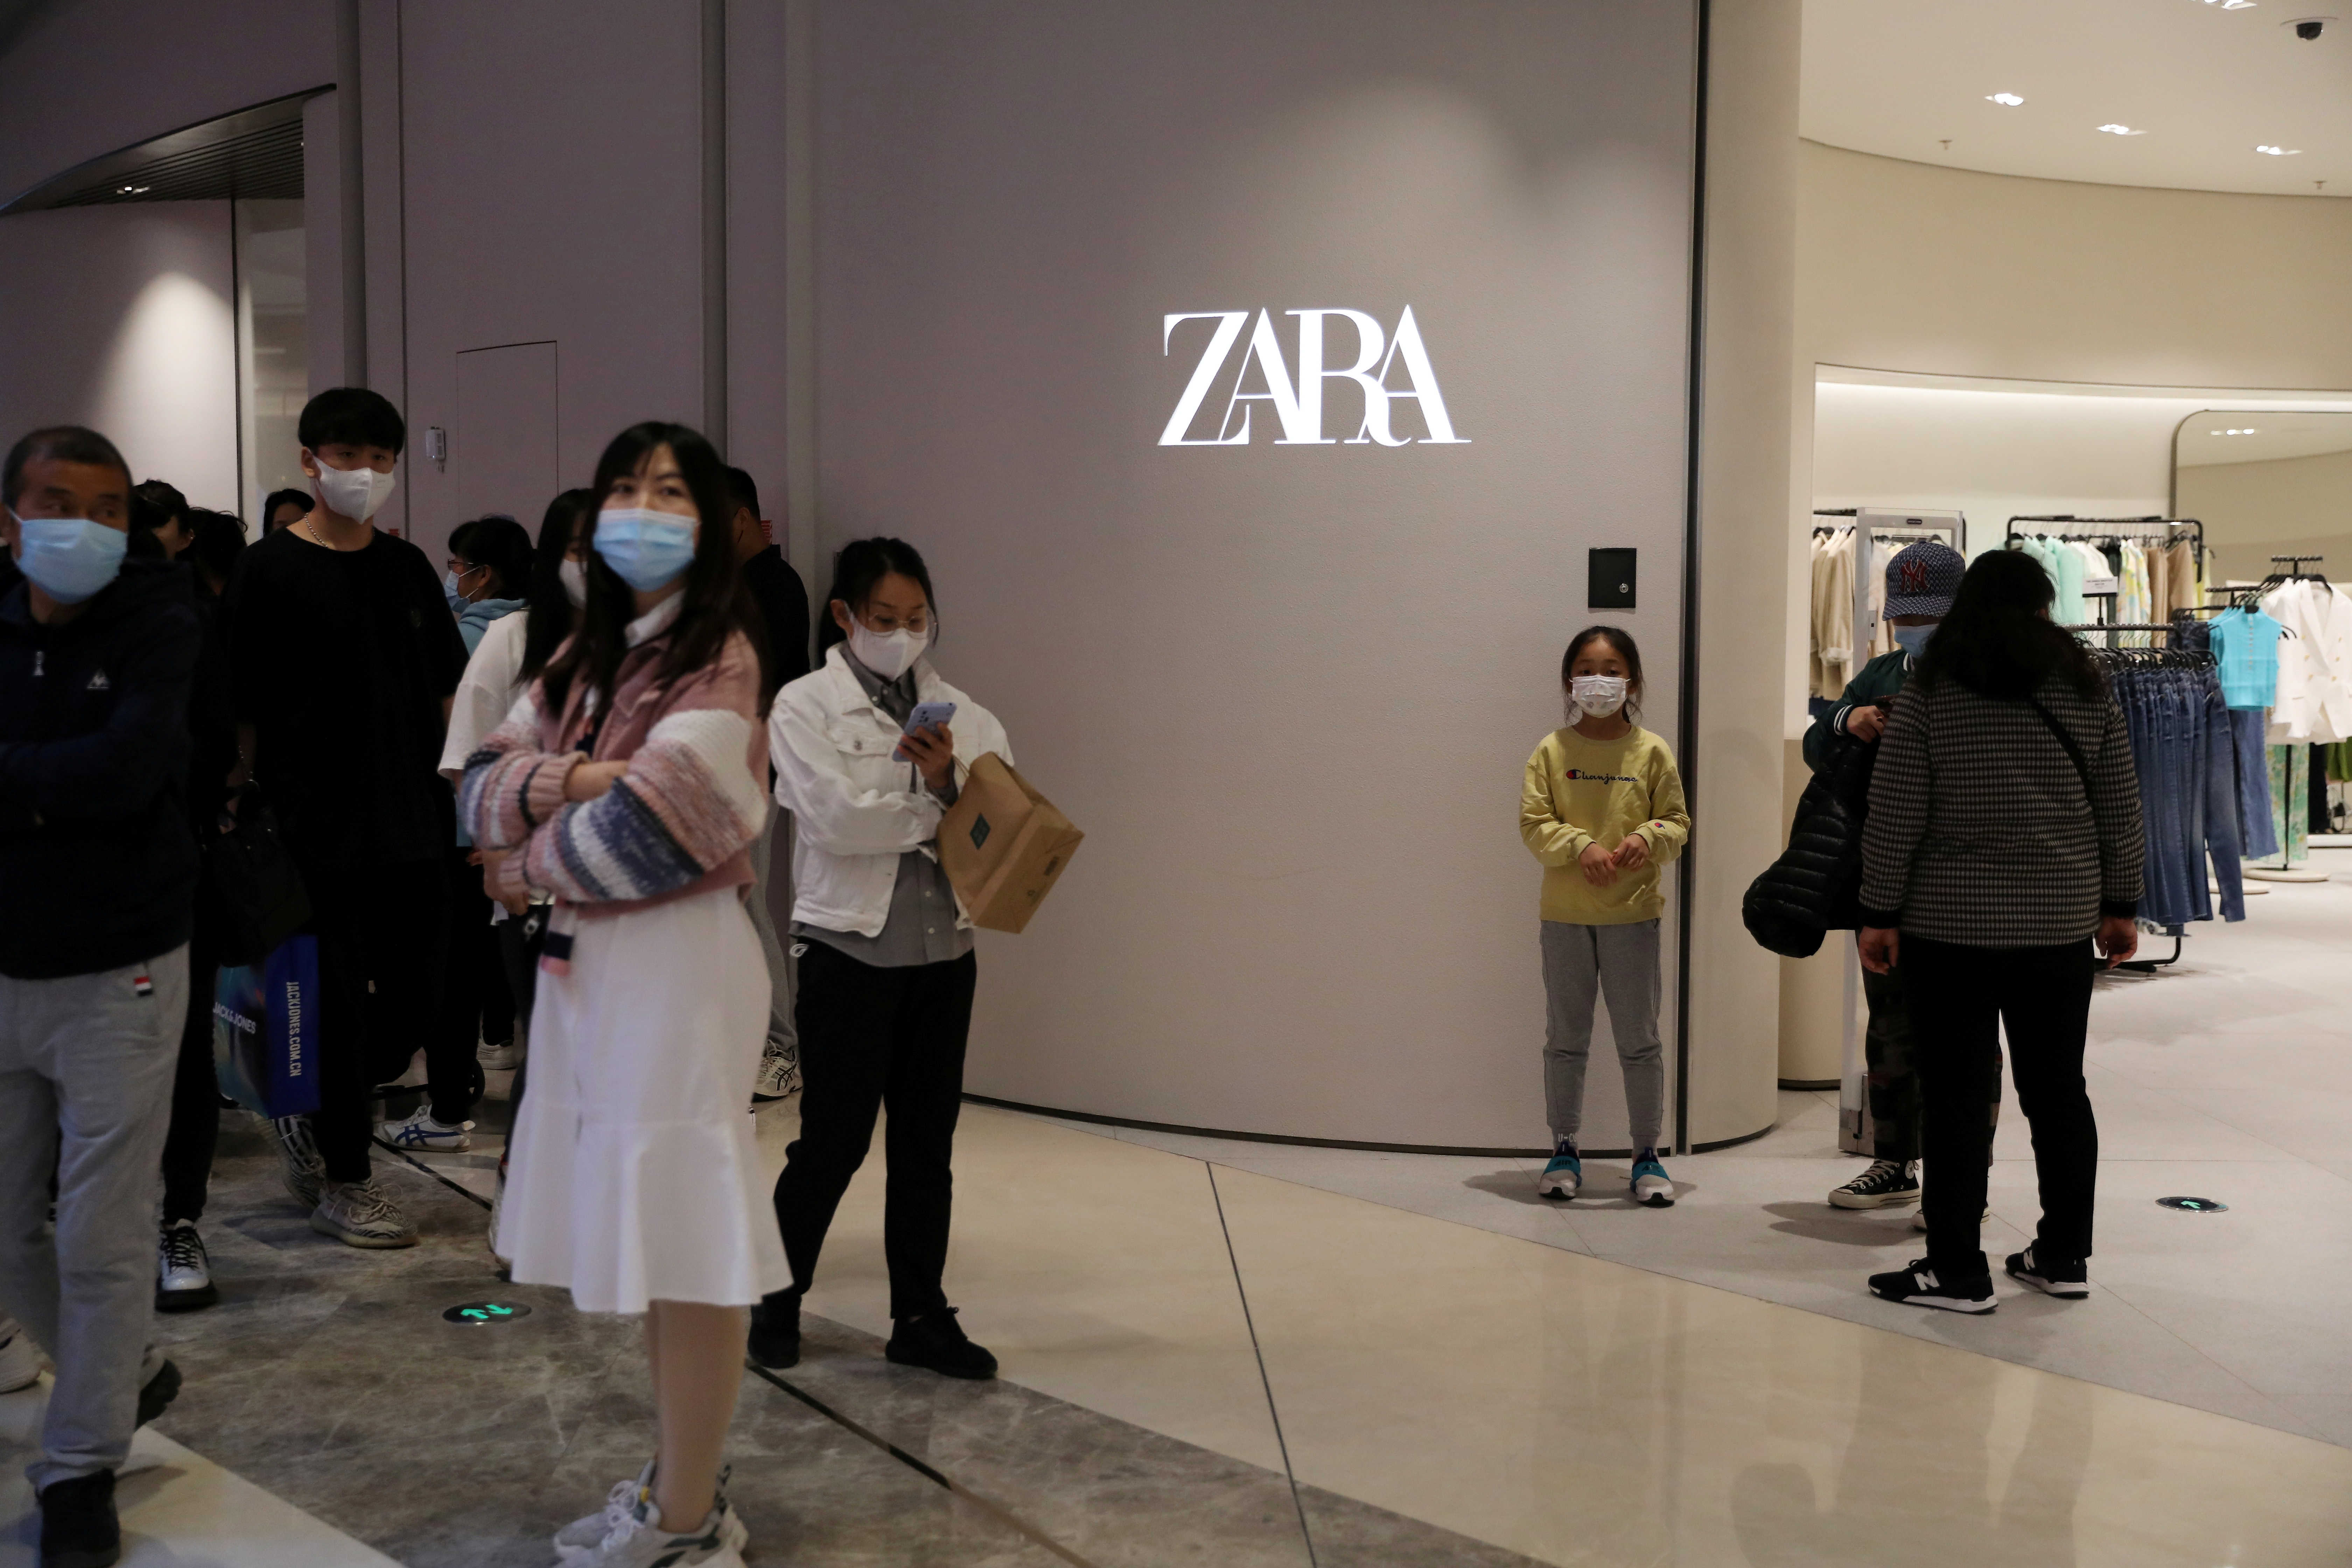 Shoppers walk past a clothing store of Inditex's Zara brand at a newly opened shopping mall in Beijing, China April 16, 2021. REUTERS/Tingshu Wang/File Photo